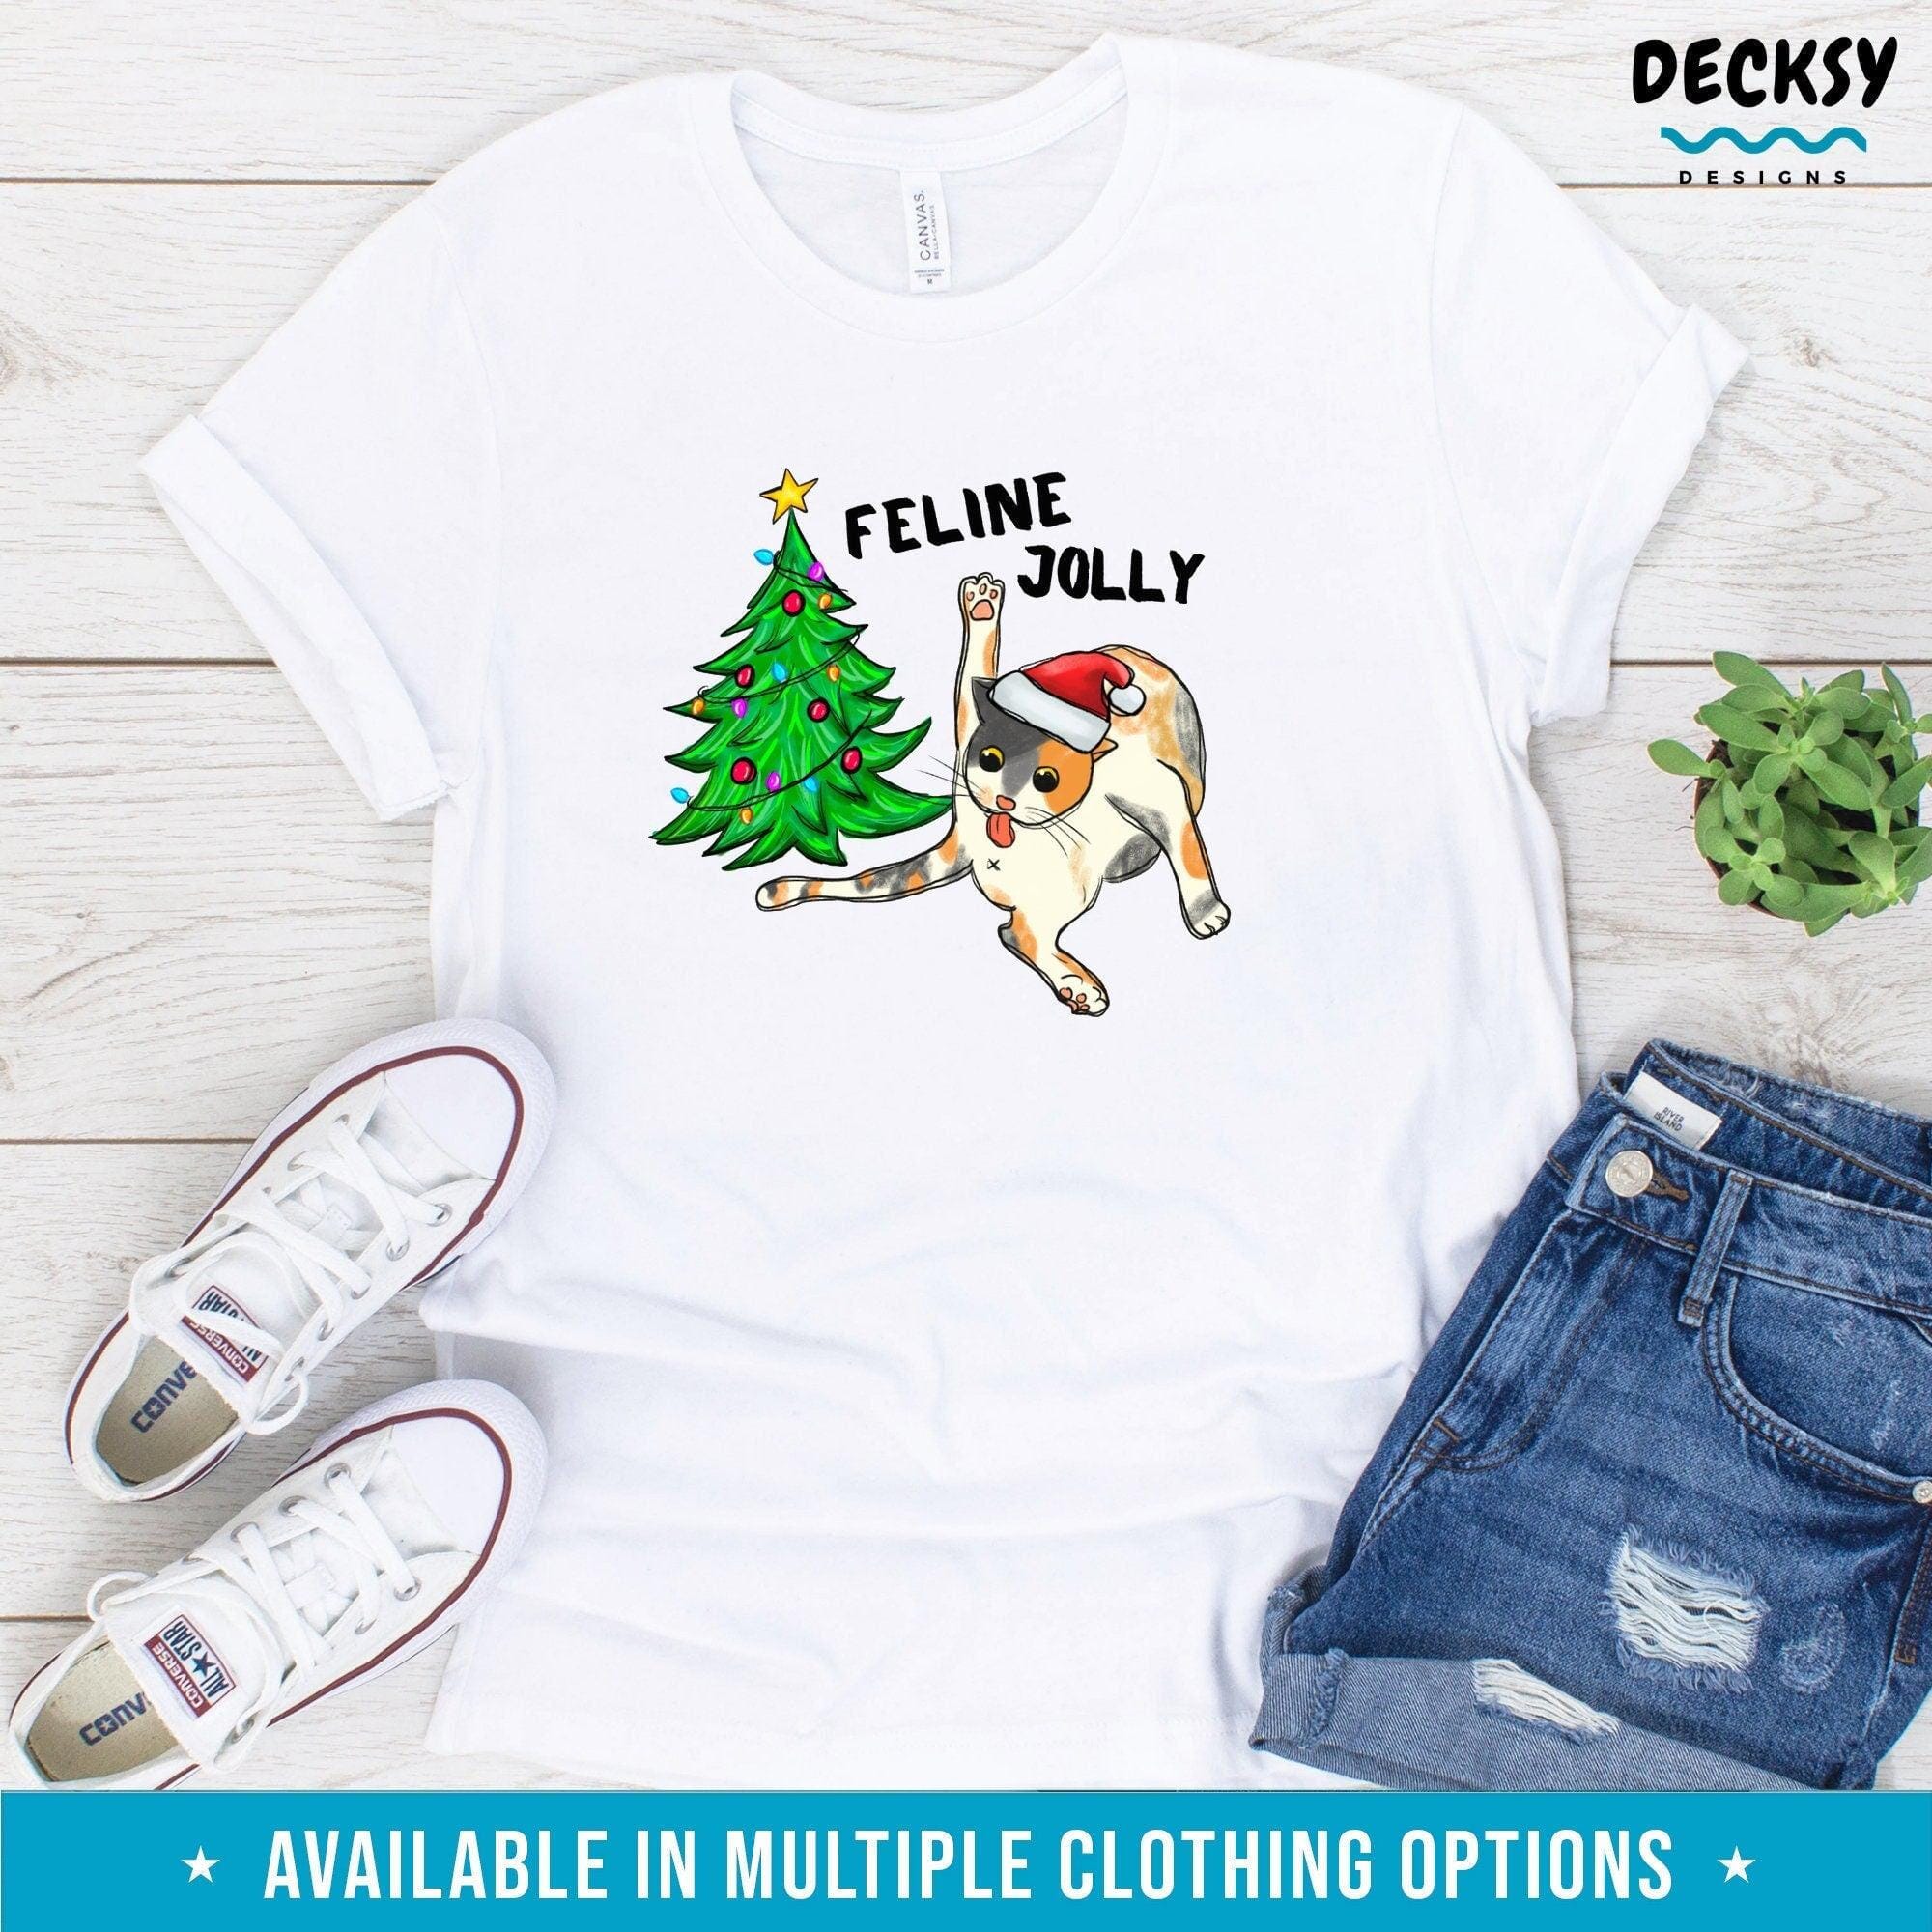 Cat Christmas Tree Shirt, Funny Xmas Gift for Cat Lover-Clothing:Gender-Neutral Adult Clothing:Tops & Tees:T-shirts:Graphic Tees-DecksyDesigns